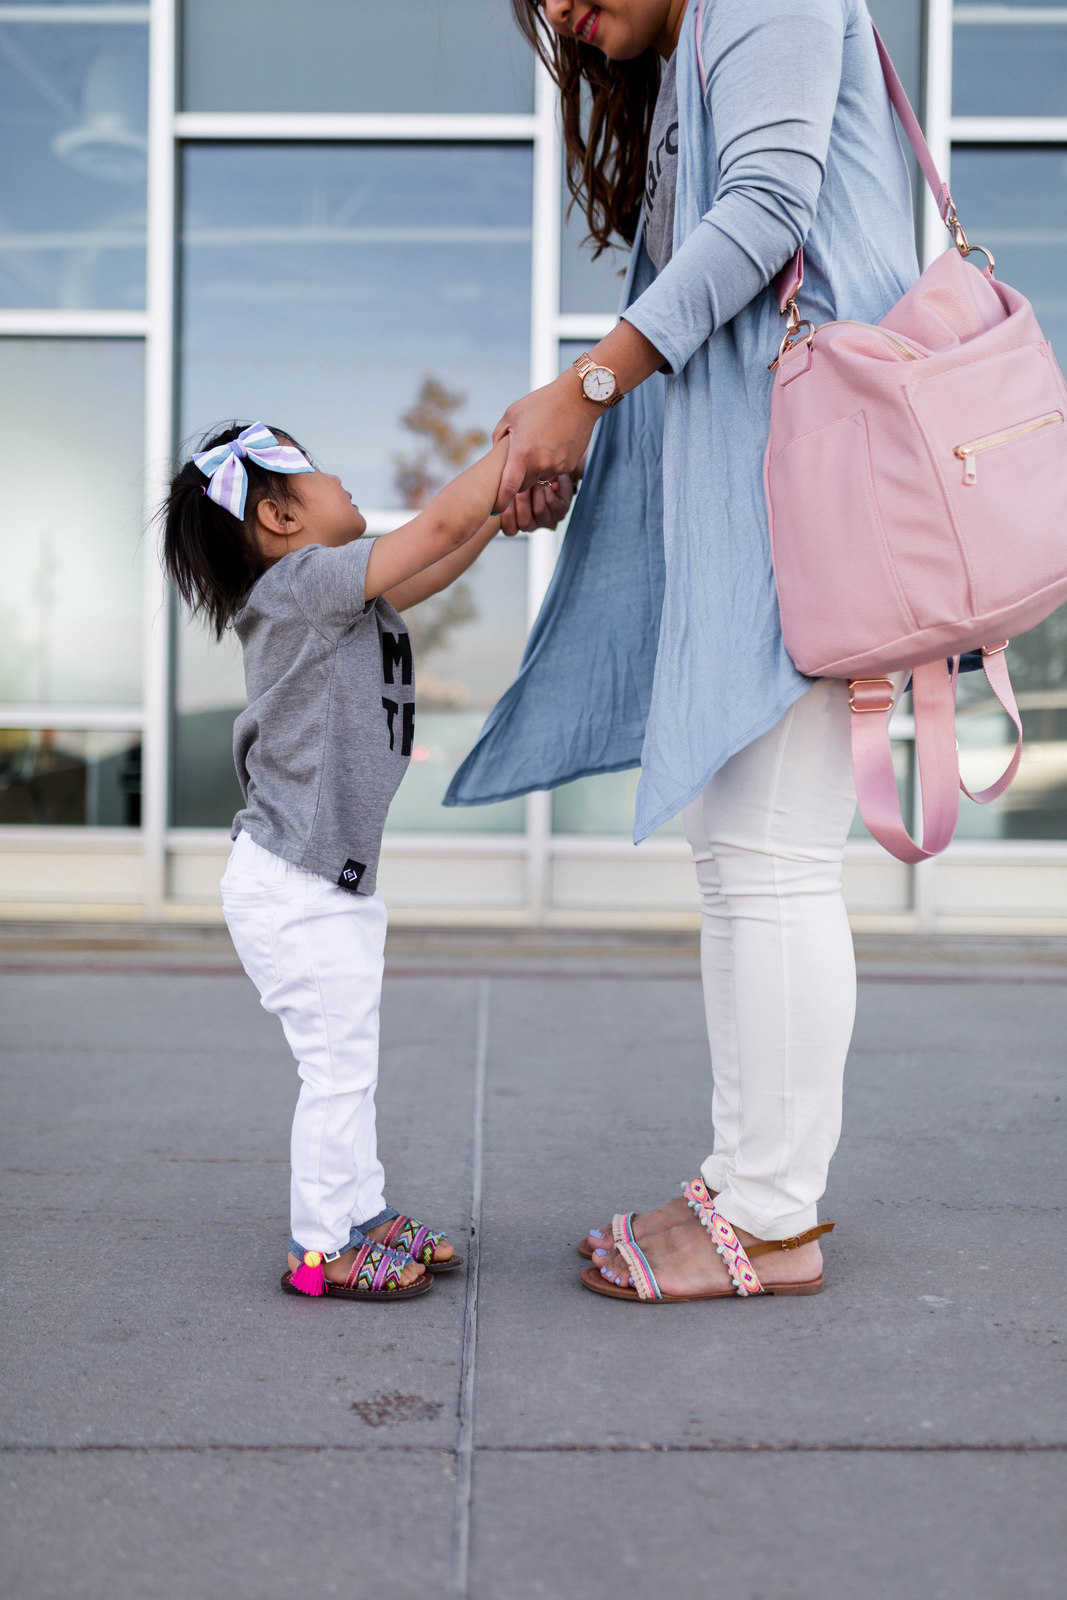 Being A Mother: 5 Things They Never Told You About Toddler Years by fashion blogger Sandy A La Mode